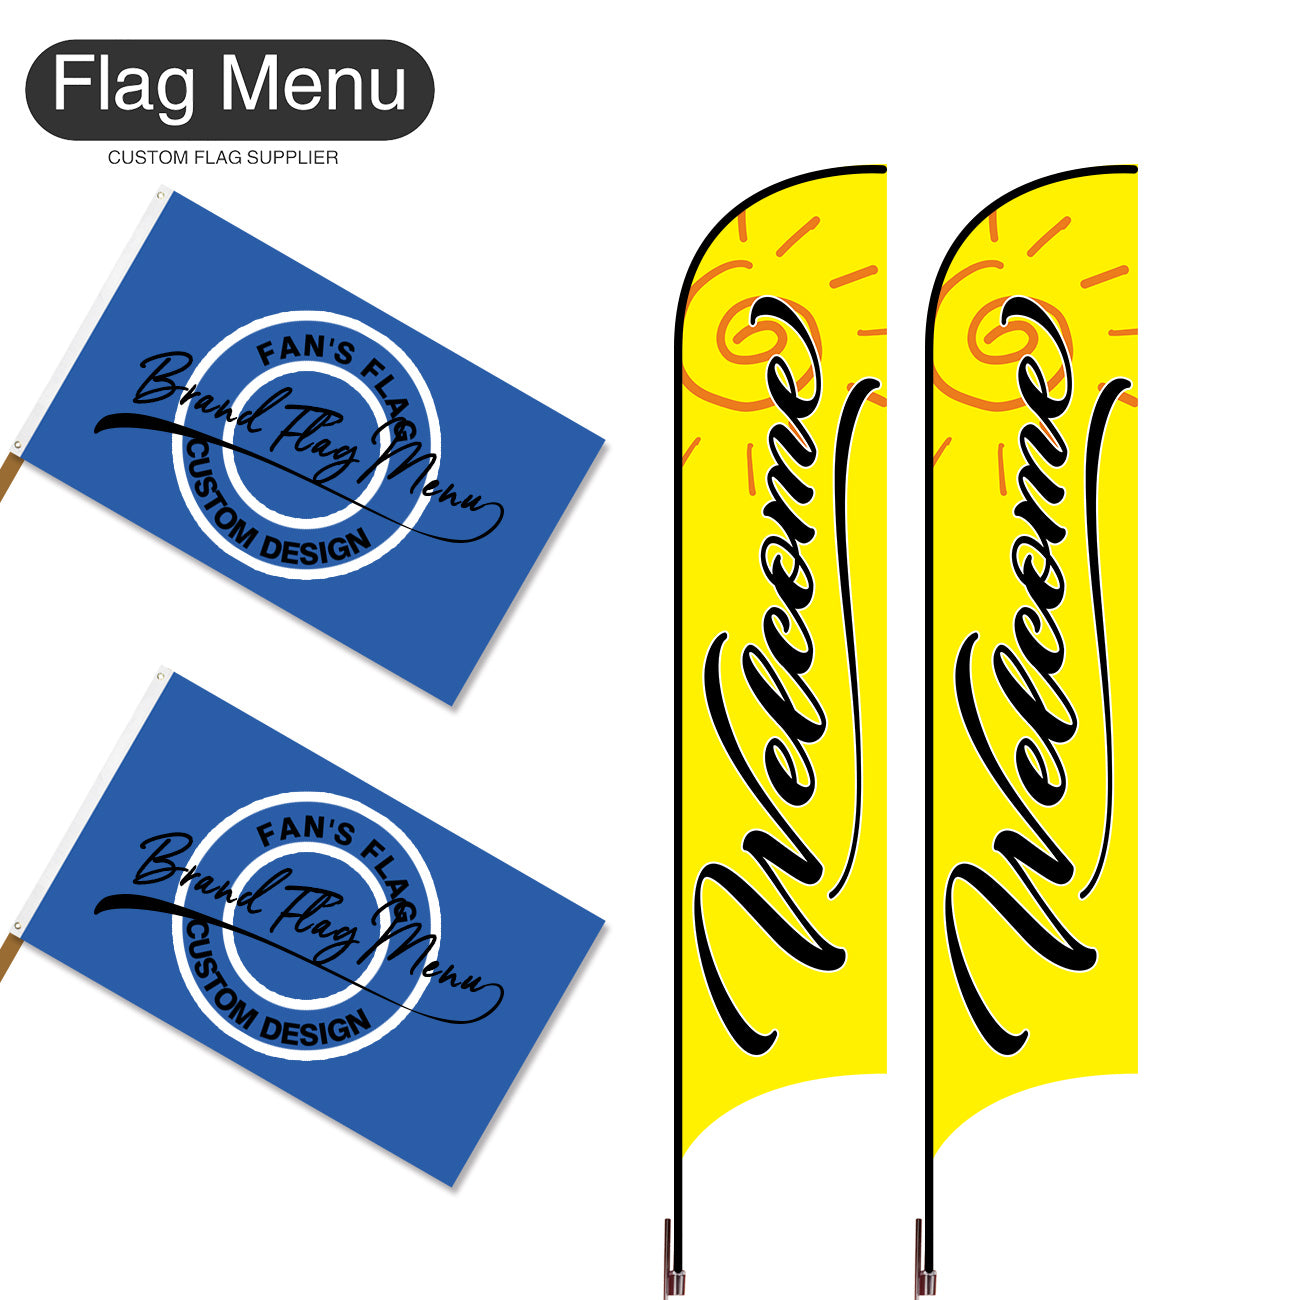 Outdoor Advertising Set - D-Yellow C-S - Feather Flag -Double Sided & 3'x5' Regular Flag -Single Sided-Cross & Water Bag-Flag Menu